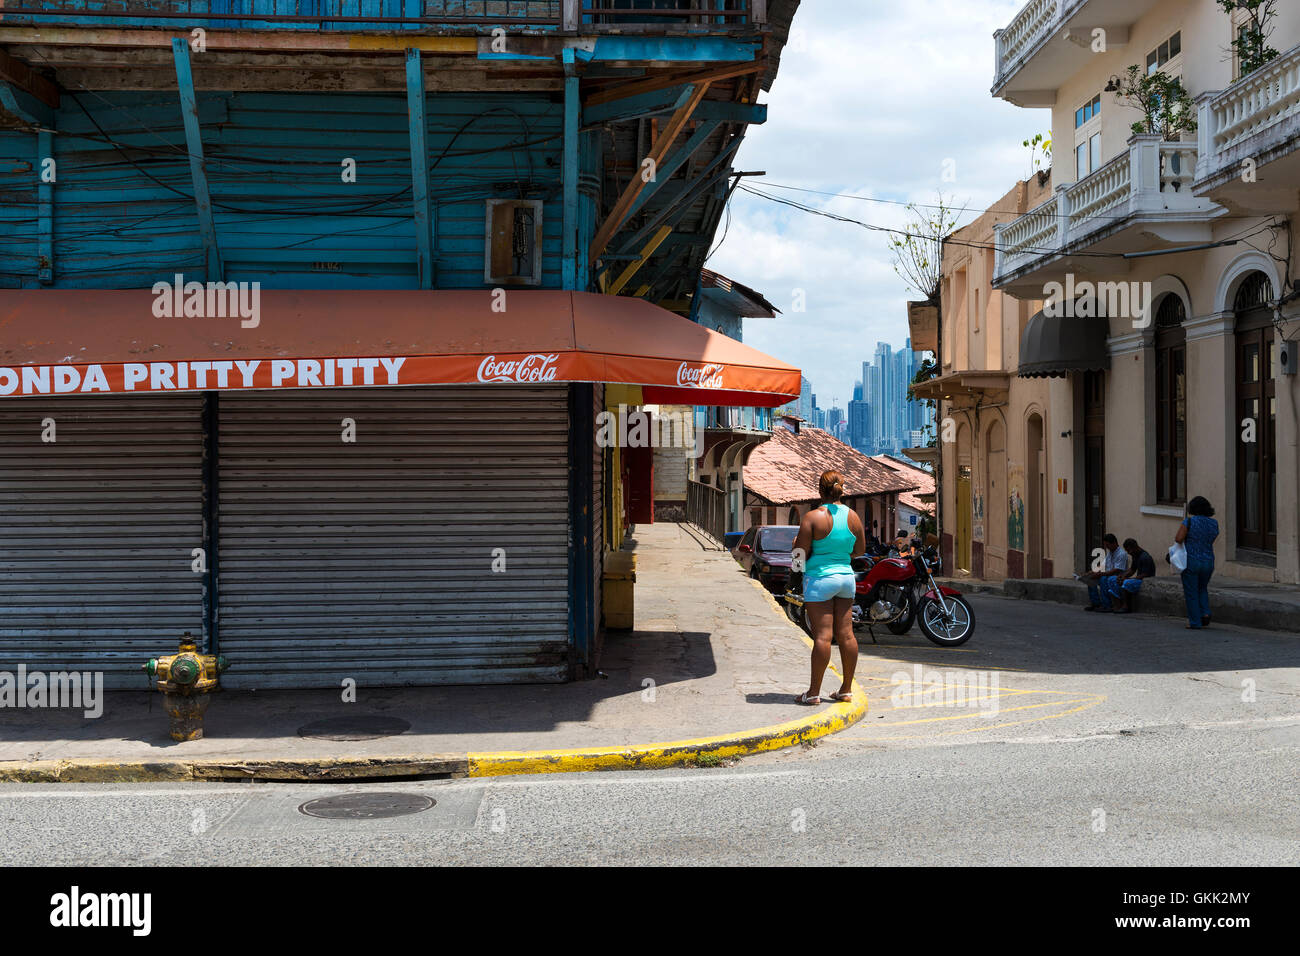 Panama City, Panama - March 16, 2014: People in a street in Casco Viejo, in Panama City, Panama. Casco Viejo is the historic dis Stock Photo